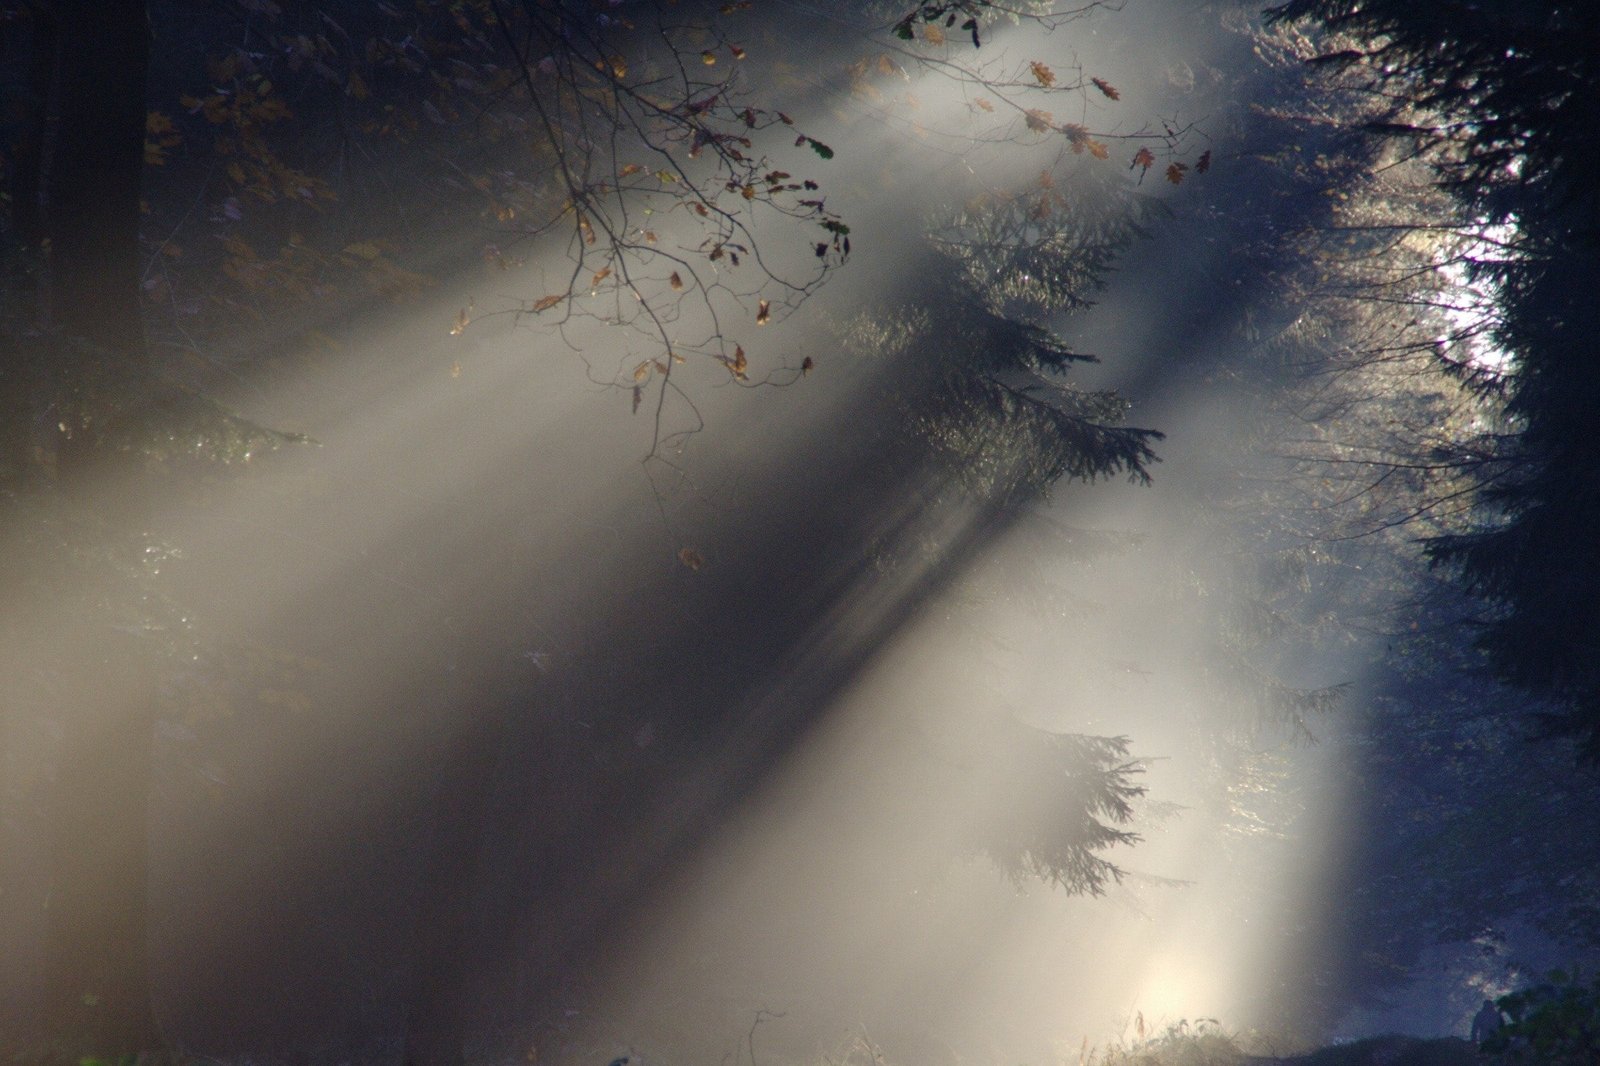 Photograph of a dreamlike fog in a forest